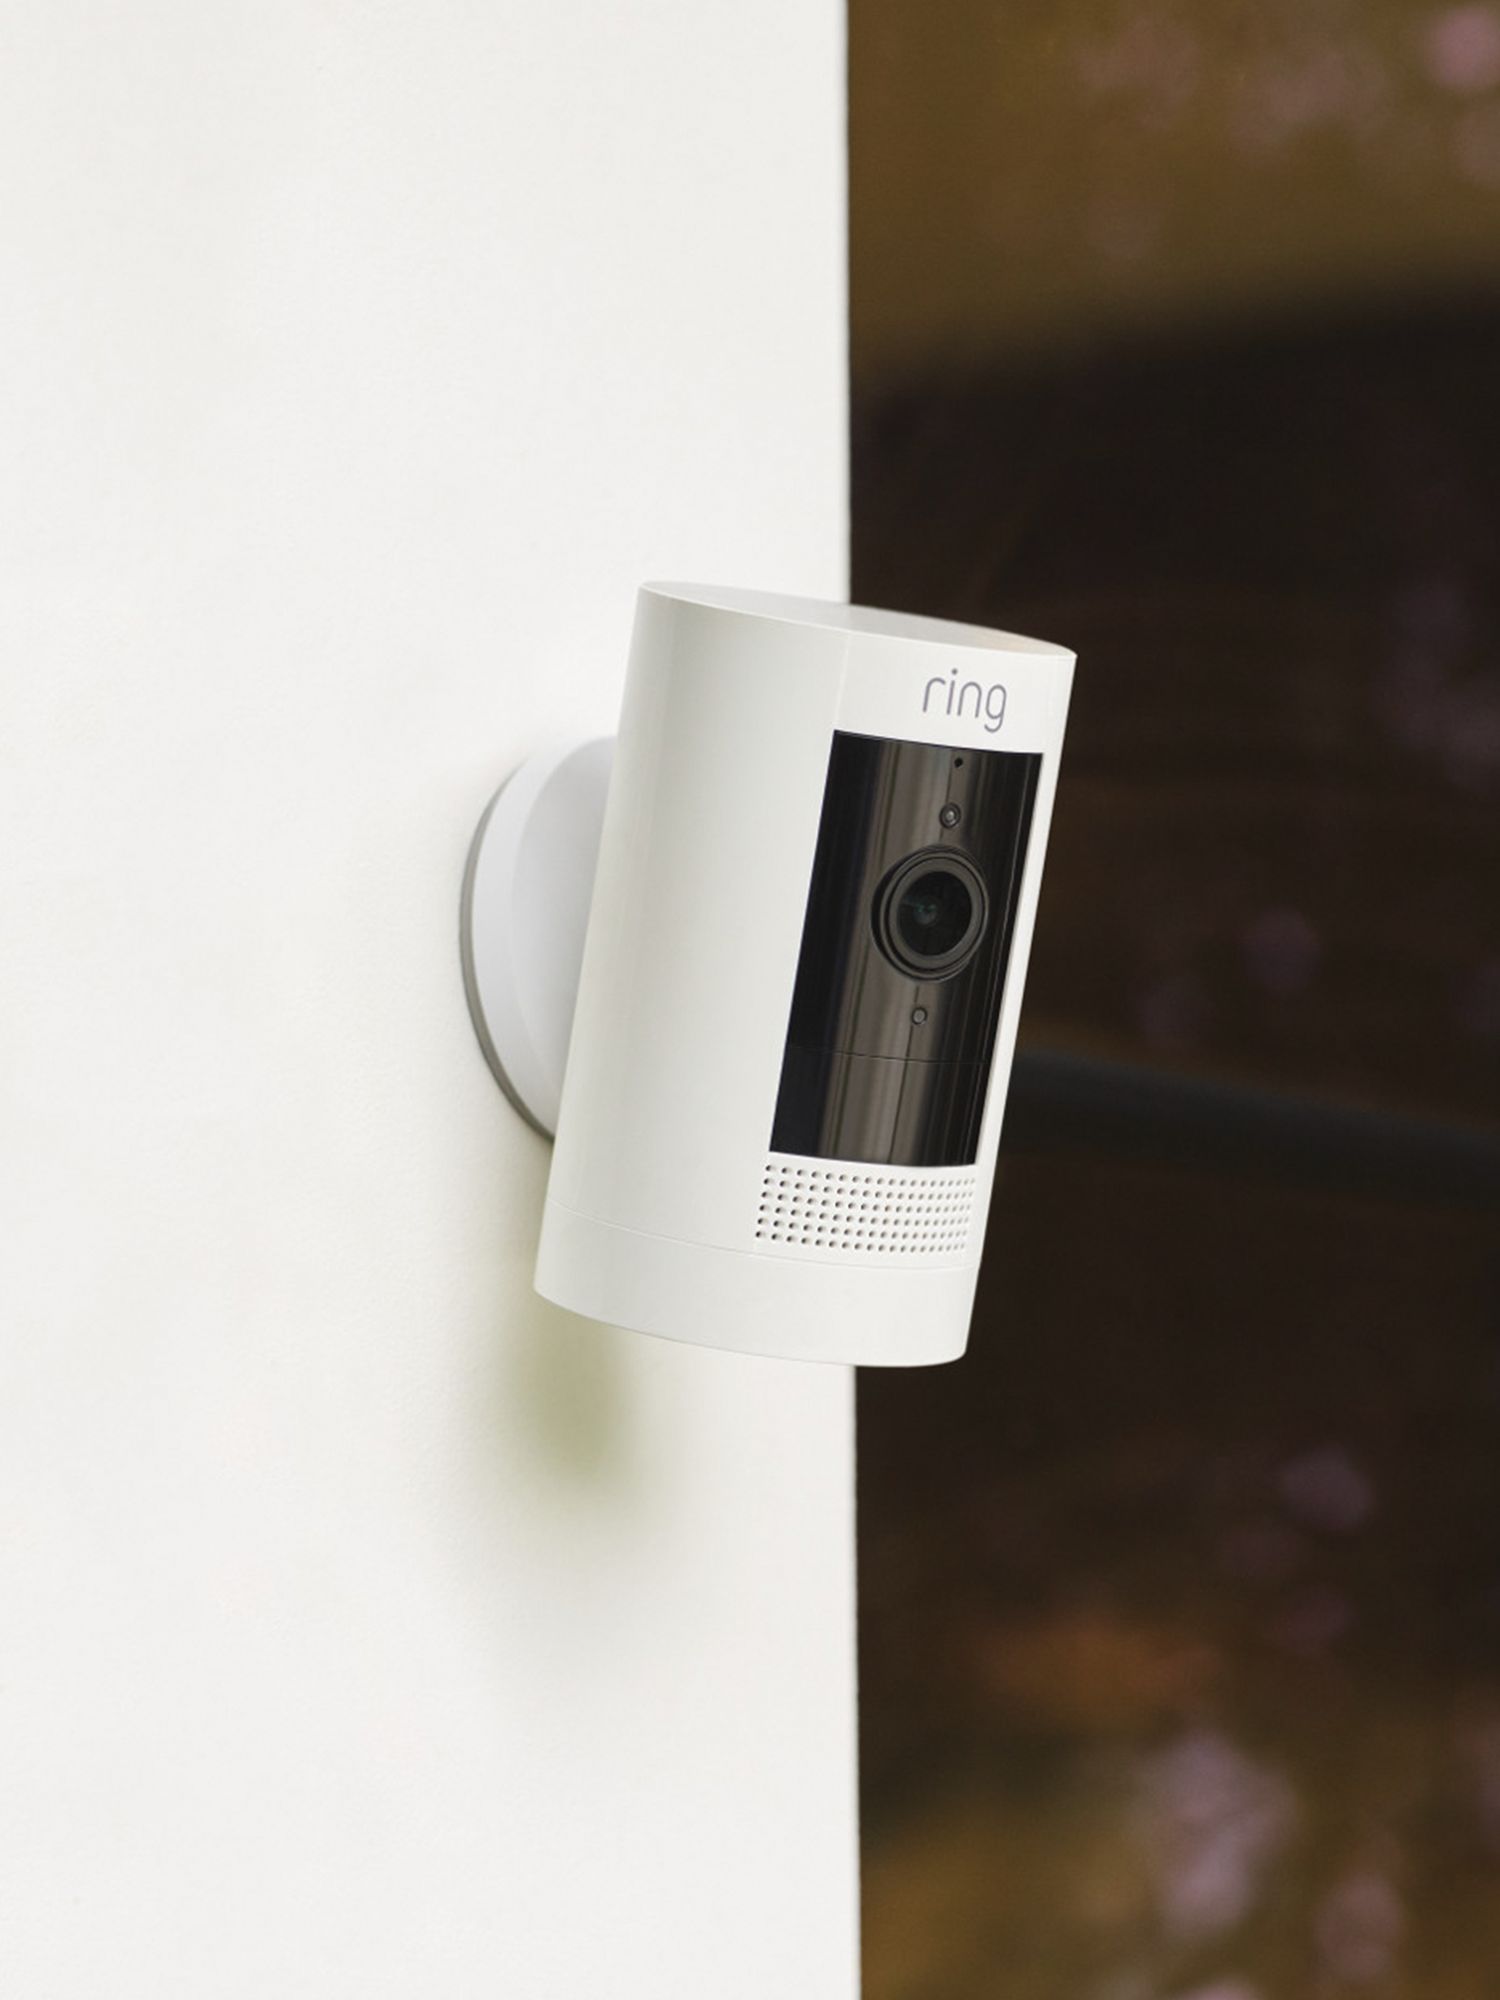 cheap ring security camera